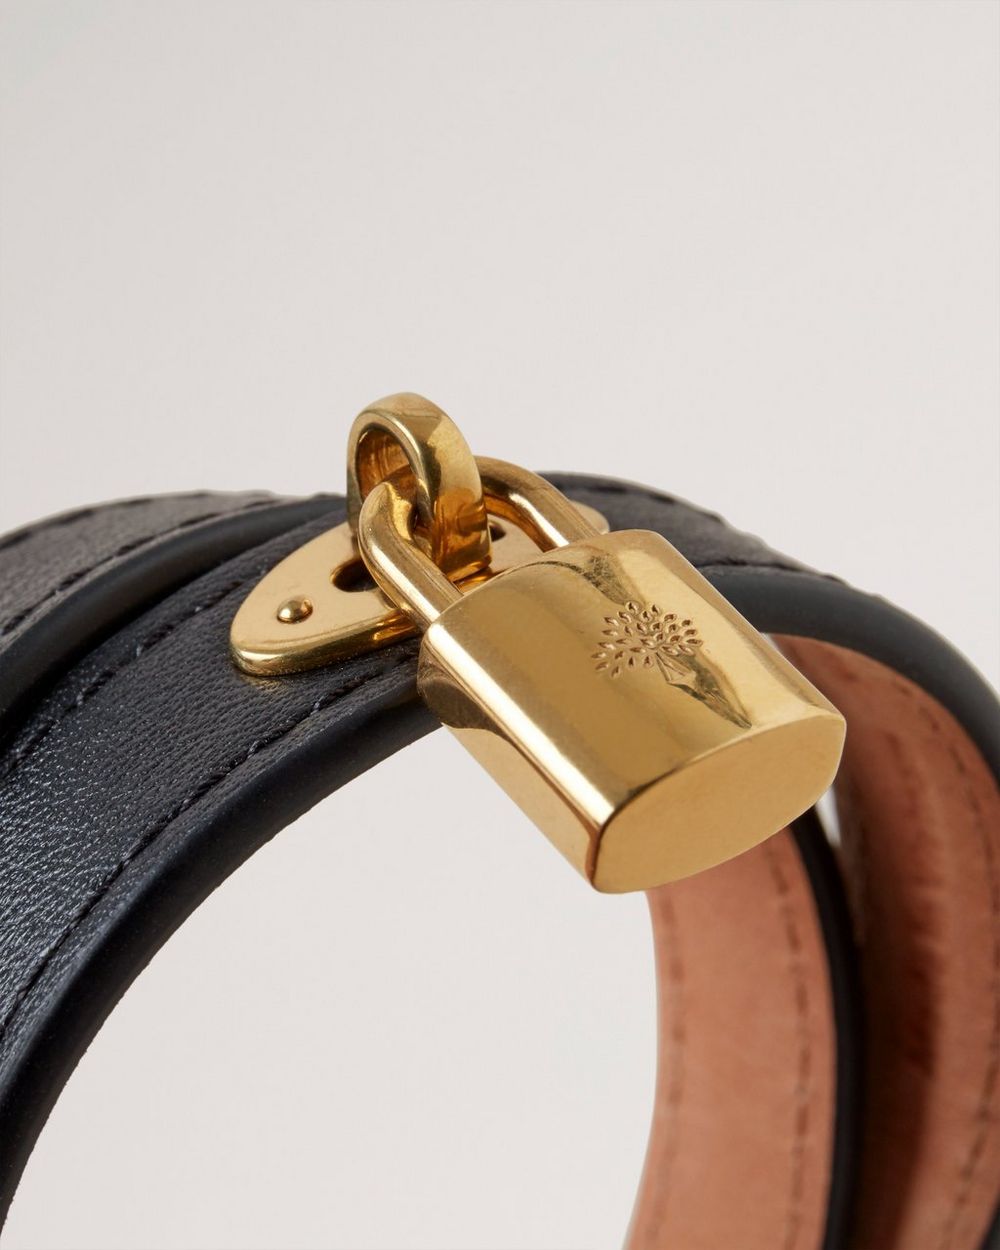 Double Leather Bracelet  Black Silky Calf & Gold plated Stainless